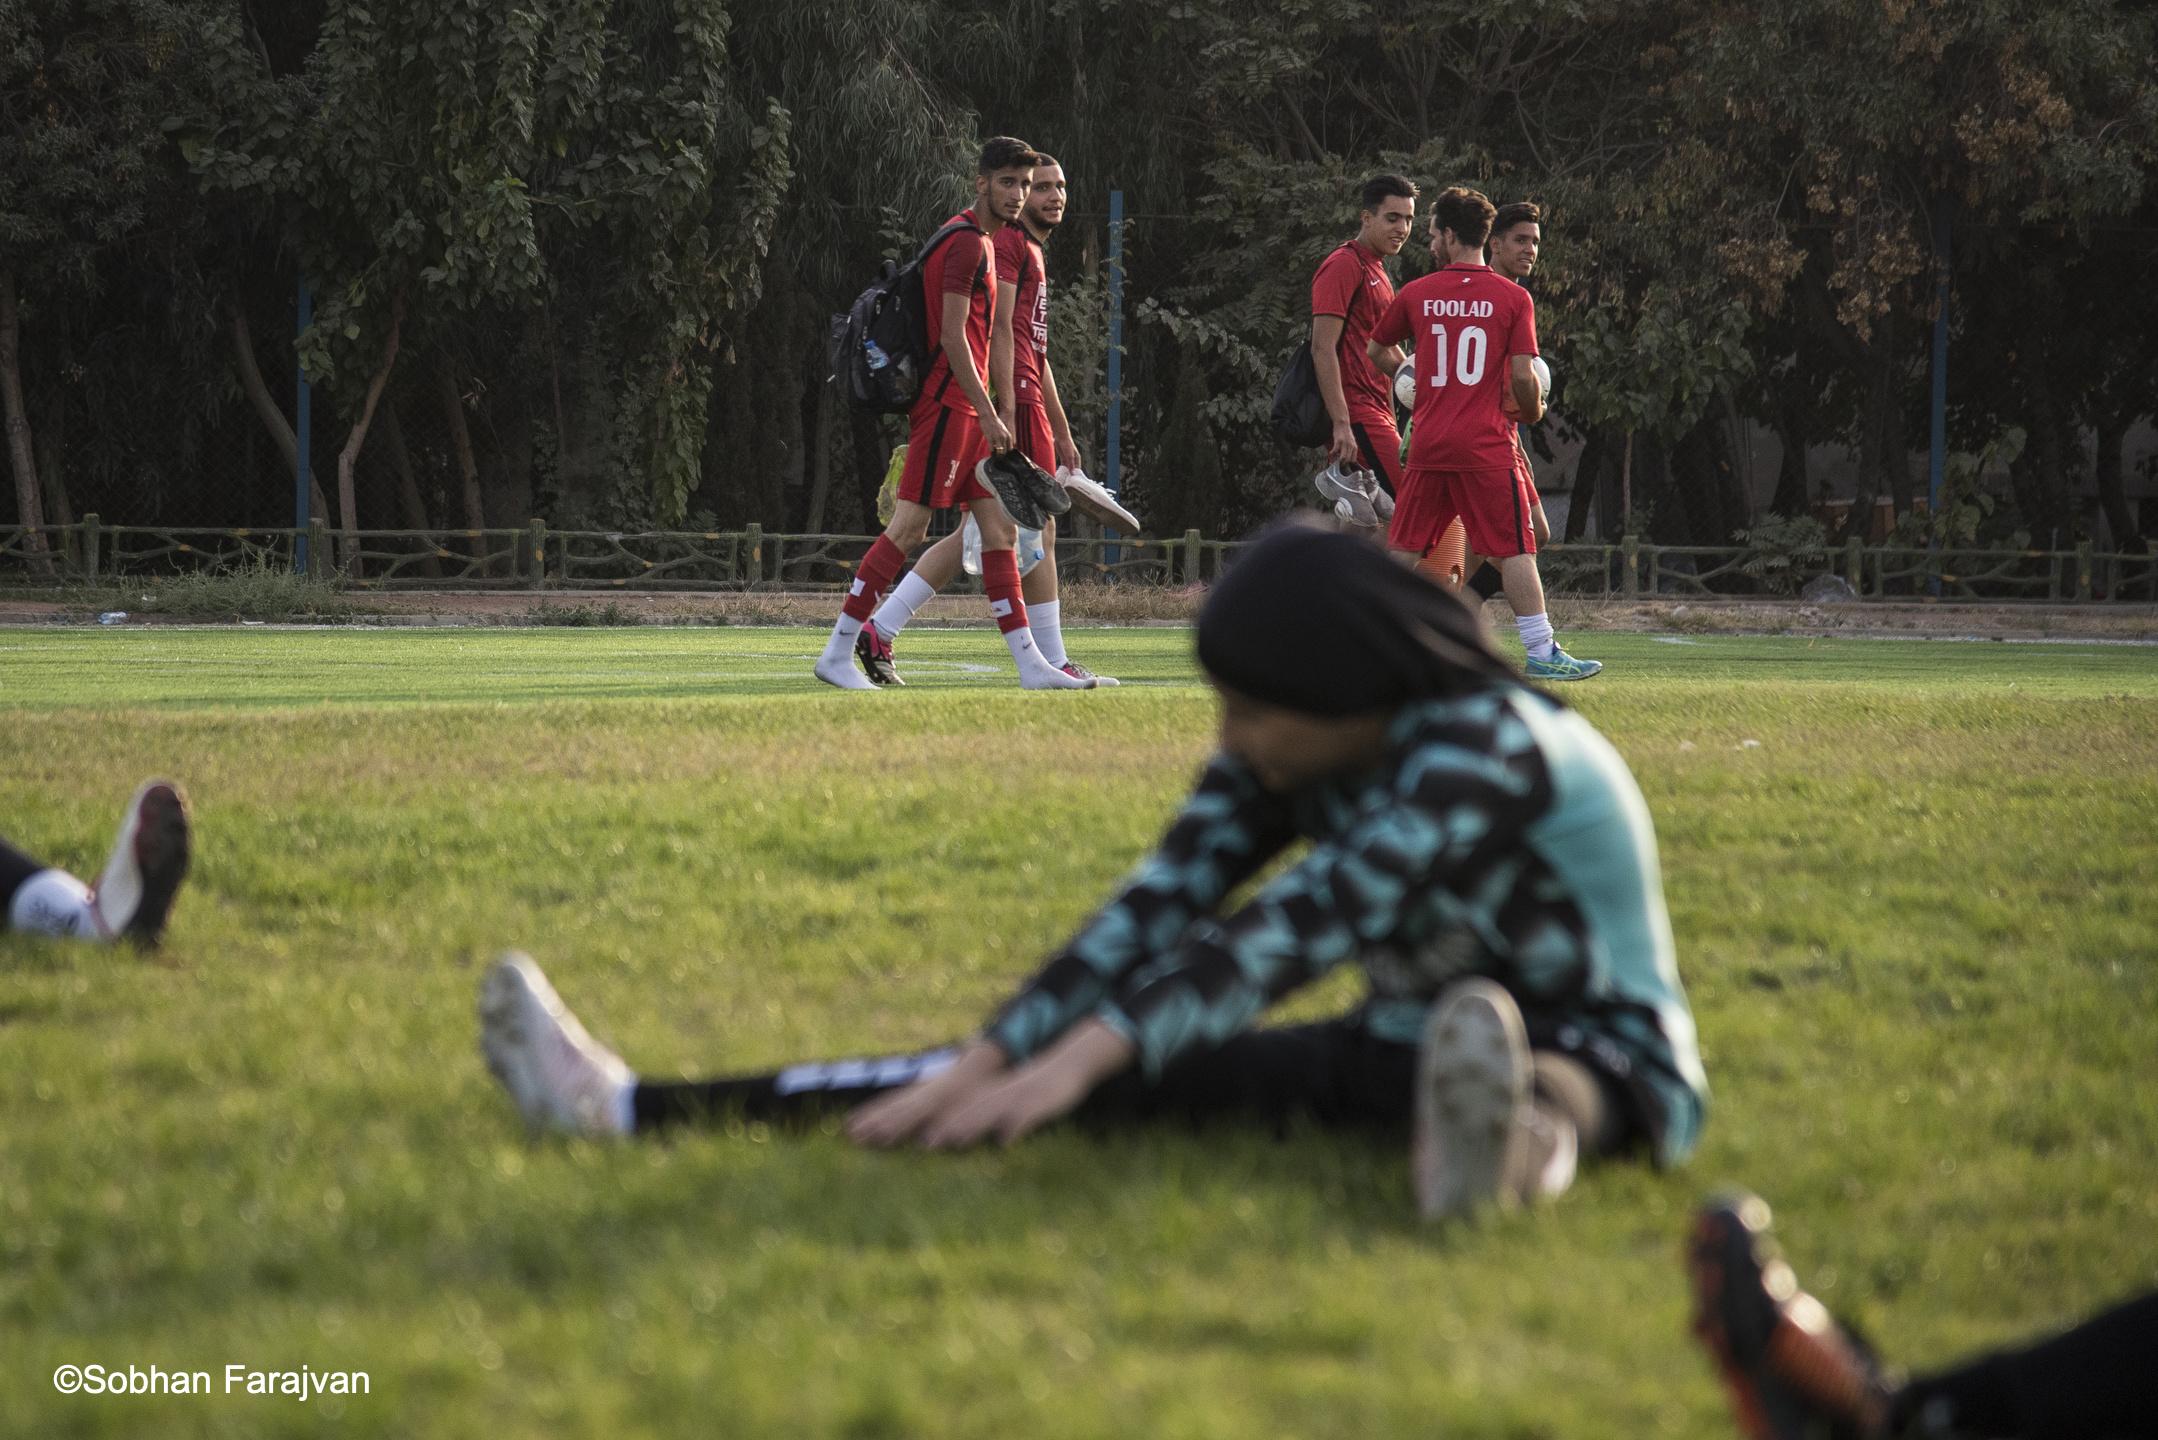 Iranian women's soccer academy - A group of boy players looks at girl player on the soccer...